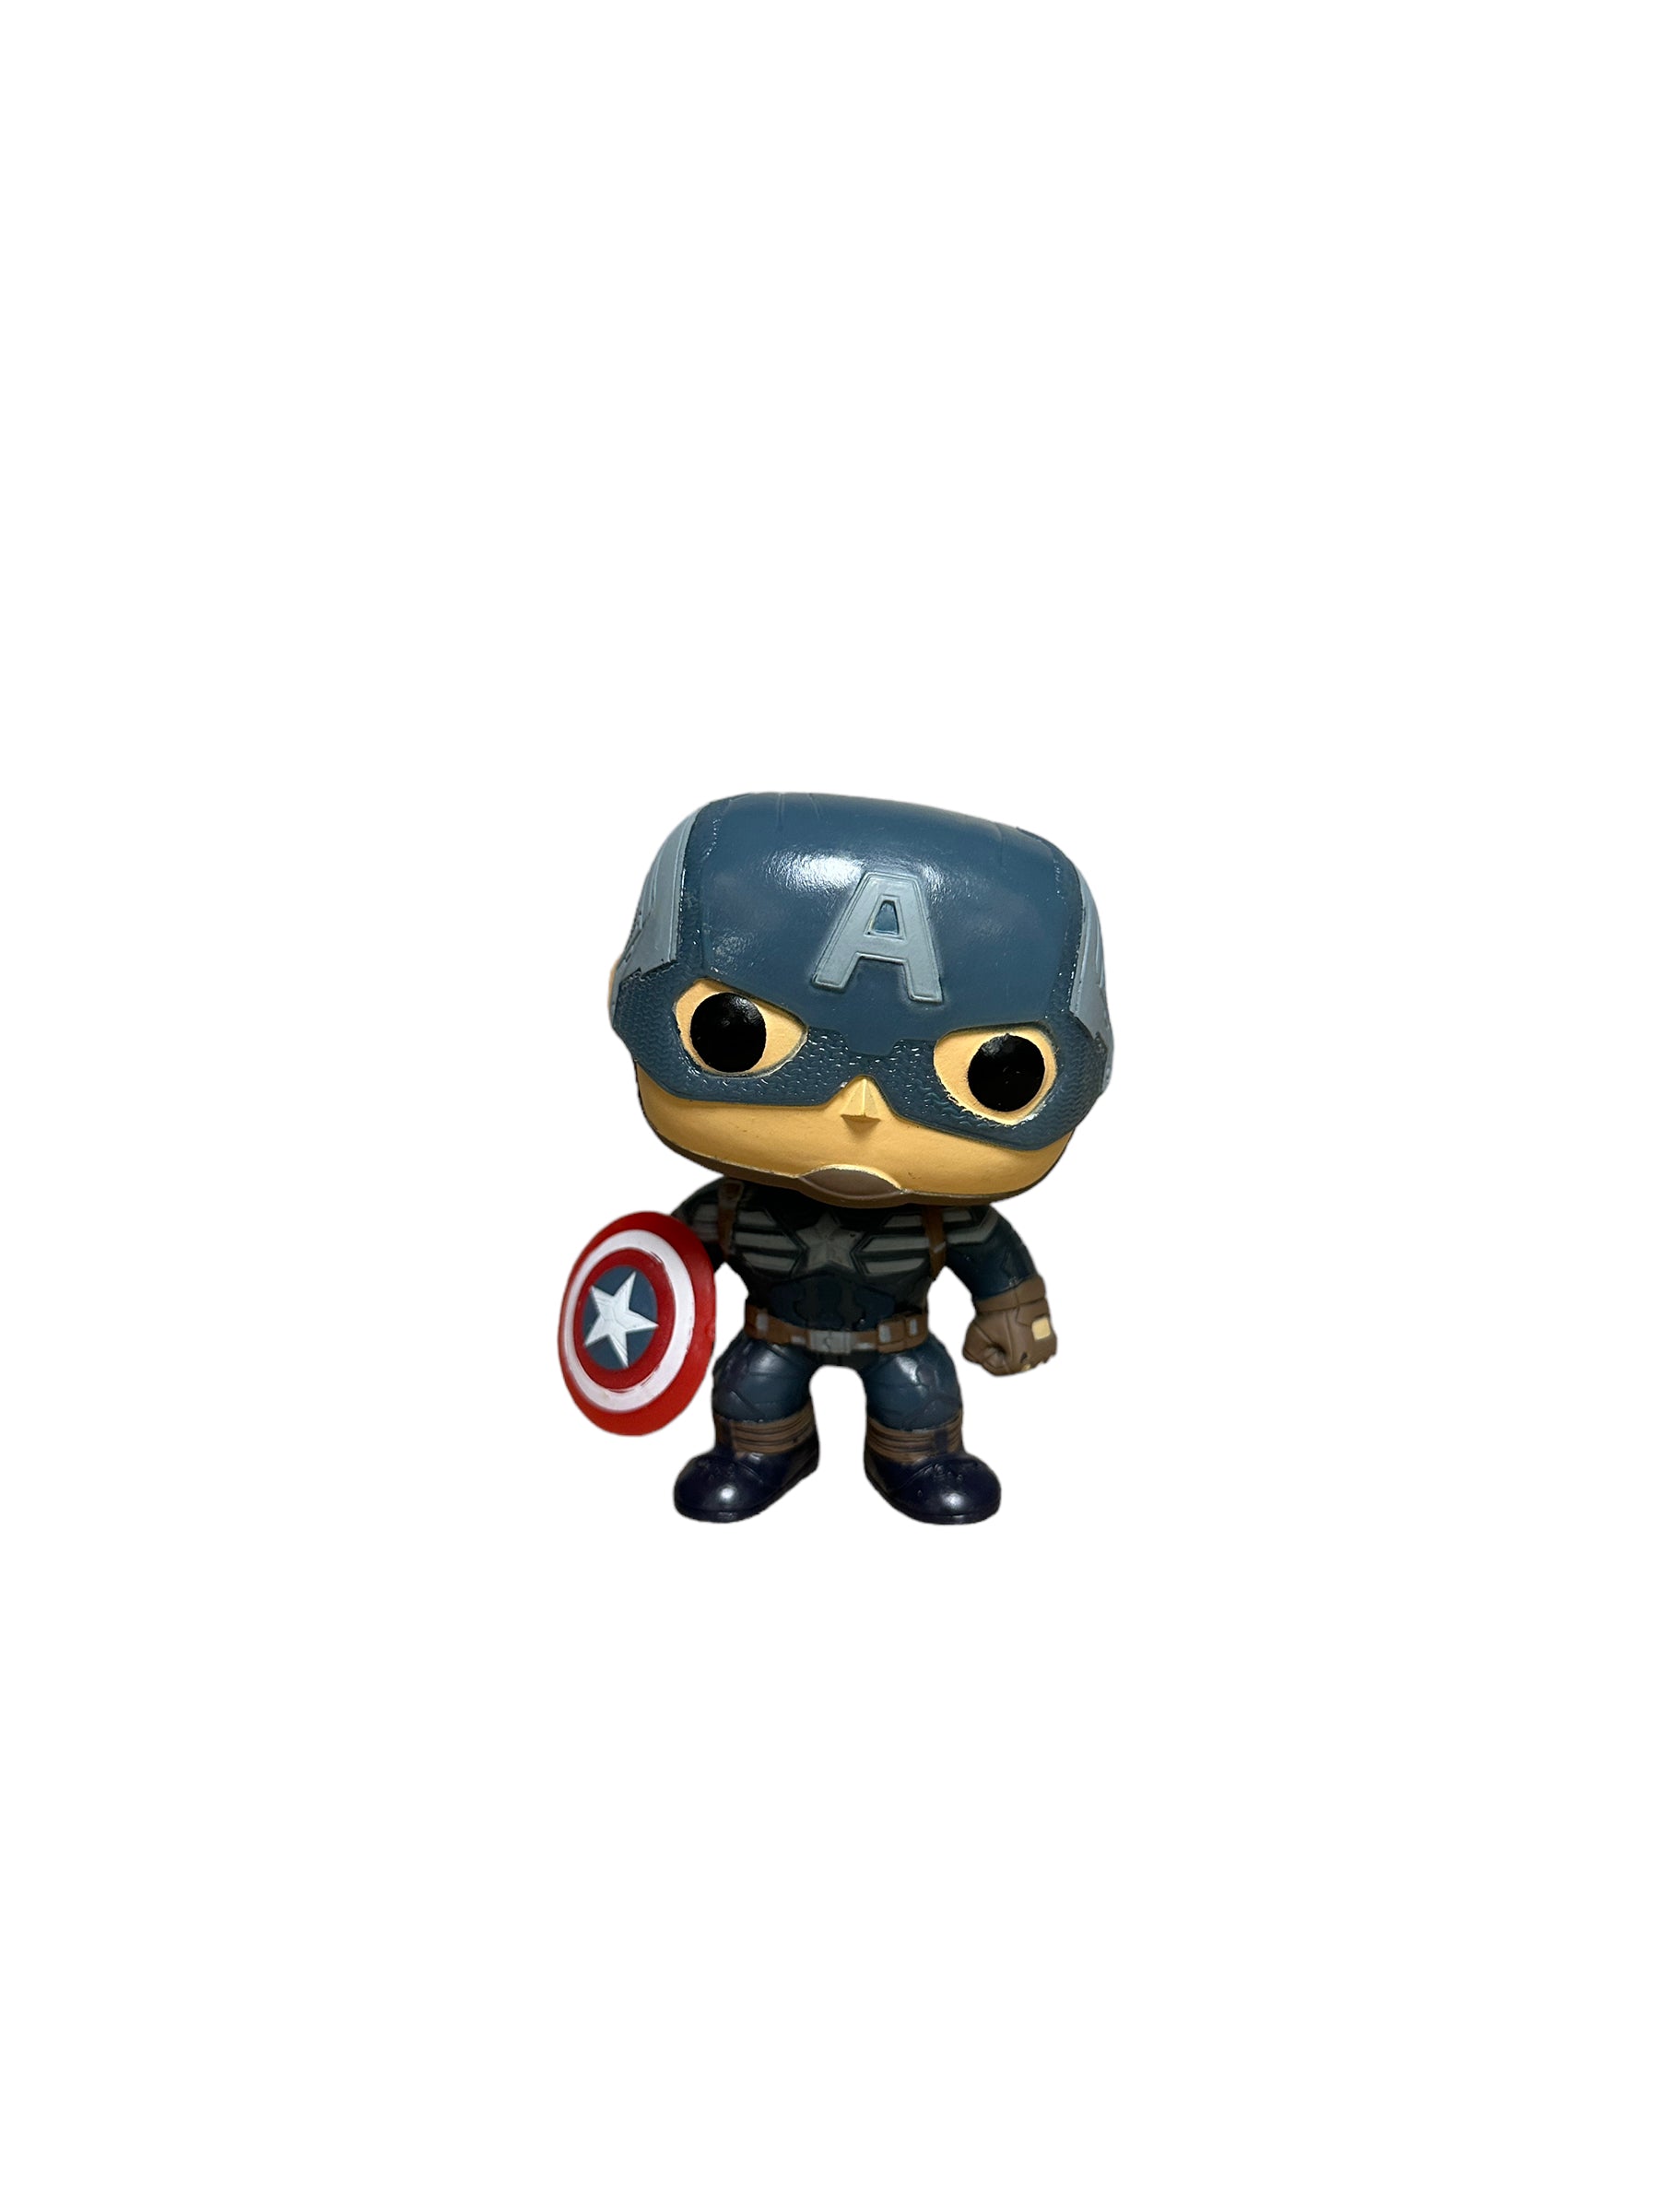 OUT OF BOX: Captain America #41 (Glow in the Dark) Funko Pop! - Captain America The Winter Soldier - Hot Topic Exclusive